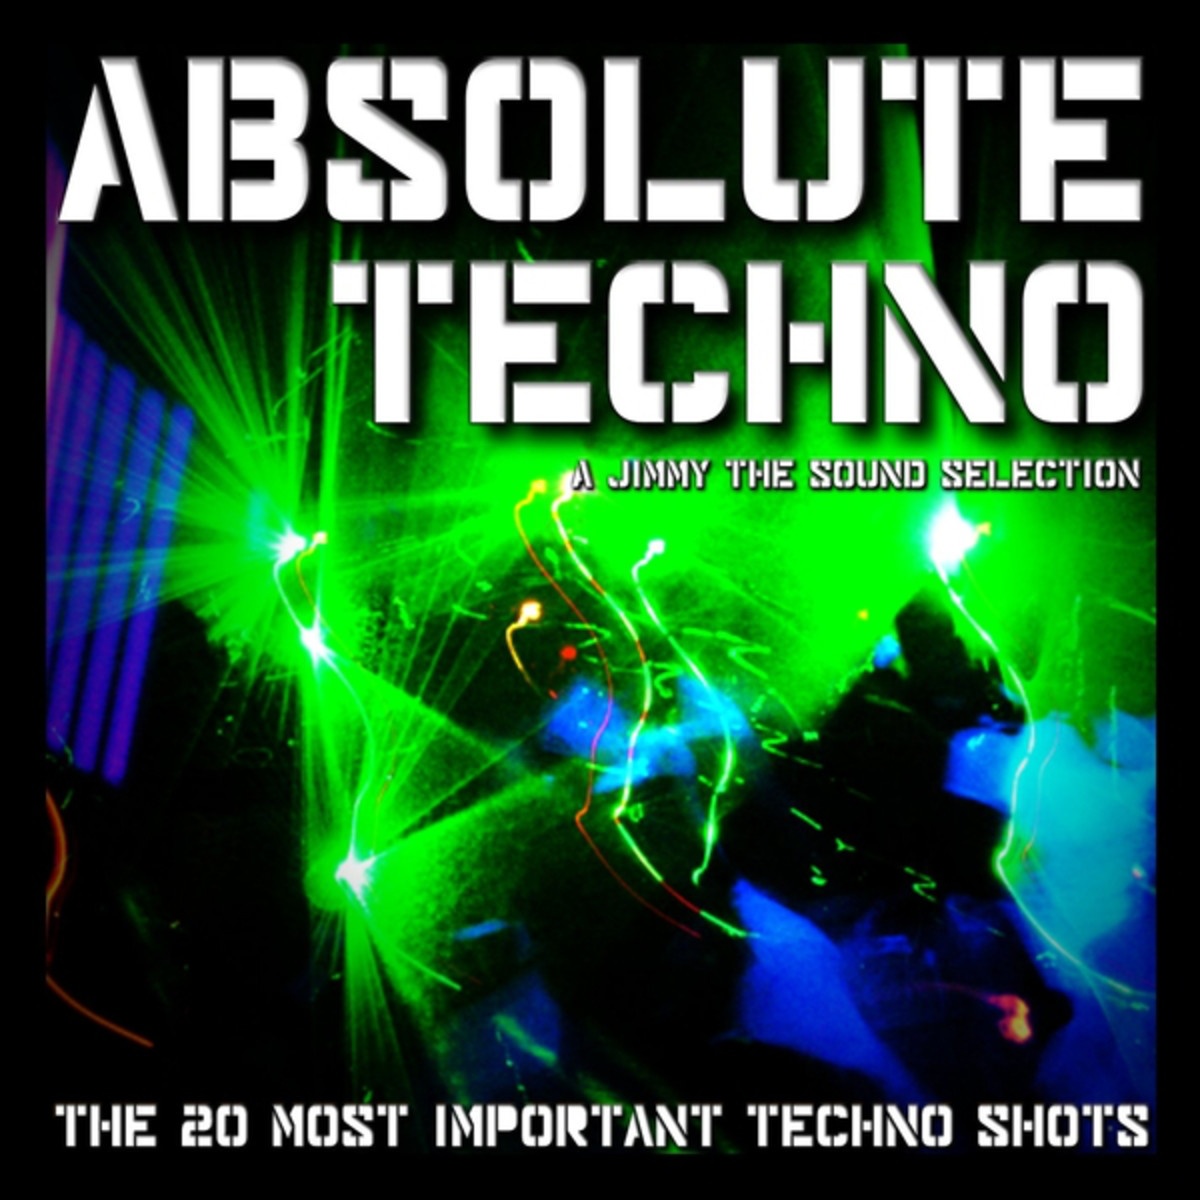 Absolute Techno